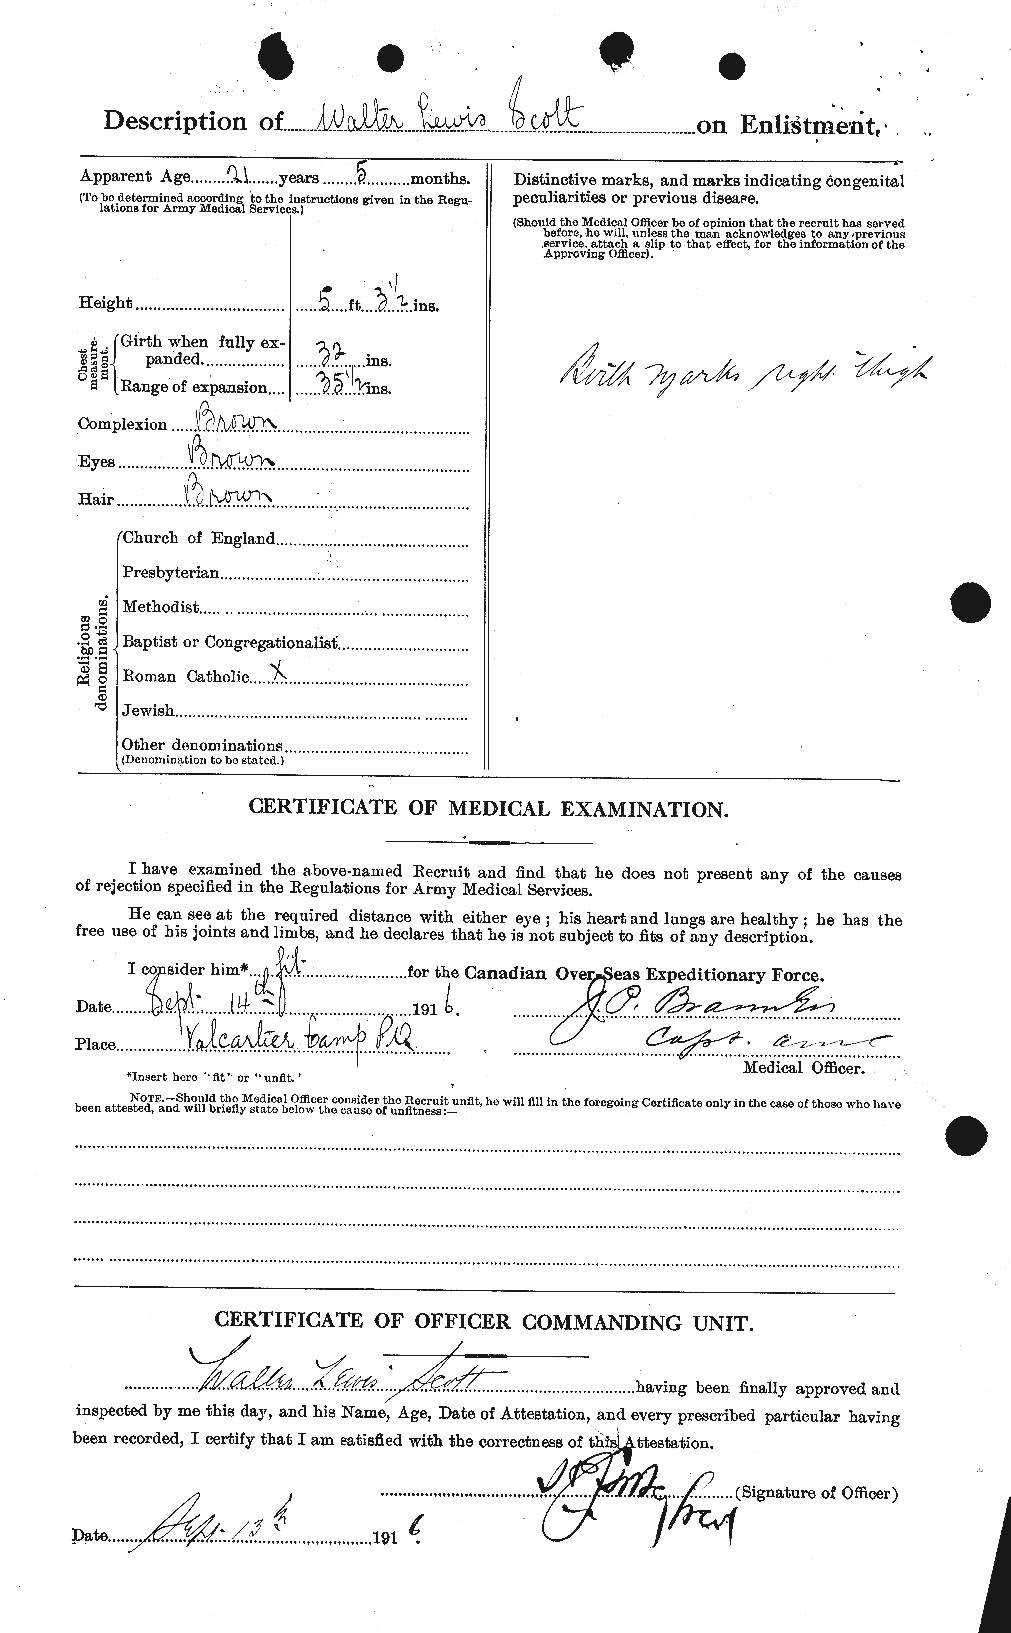 Personnel Records of the First World War - CEF 087969b